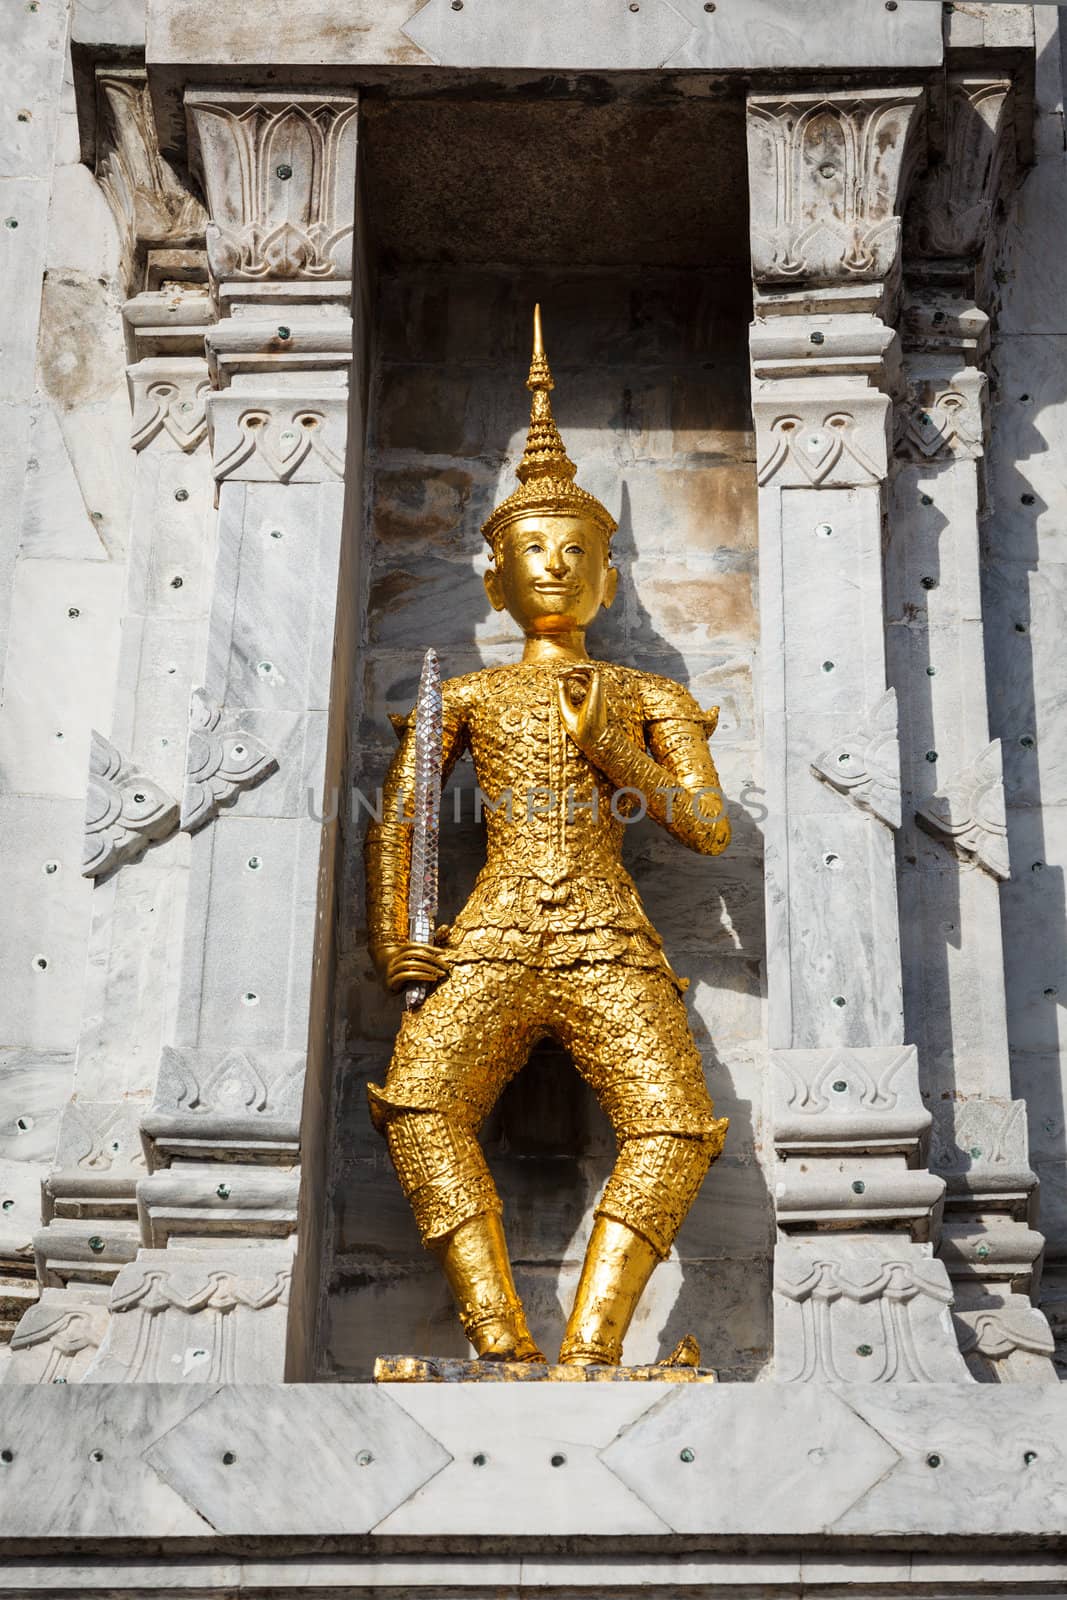 Gold guard on tower, in buddhist temple Wat Phi, Bangkok, Thailand